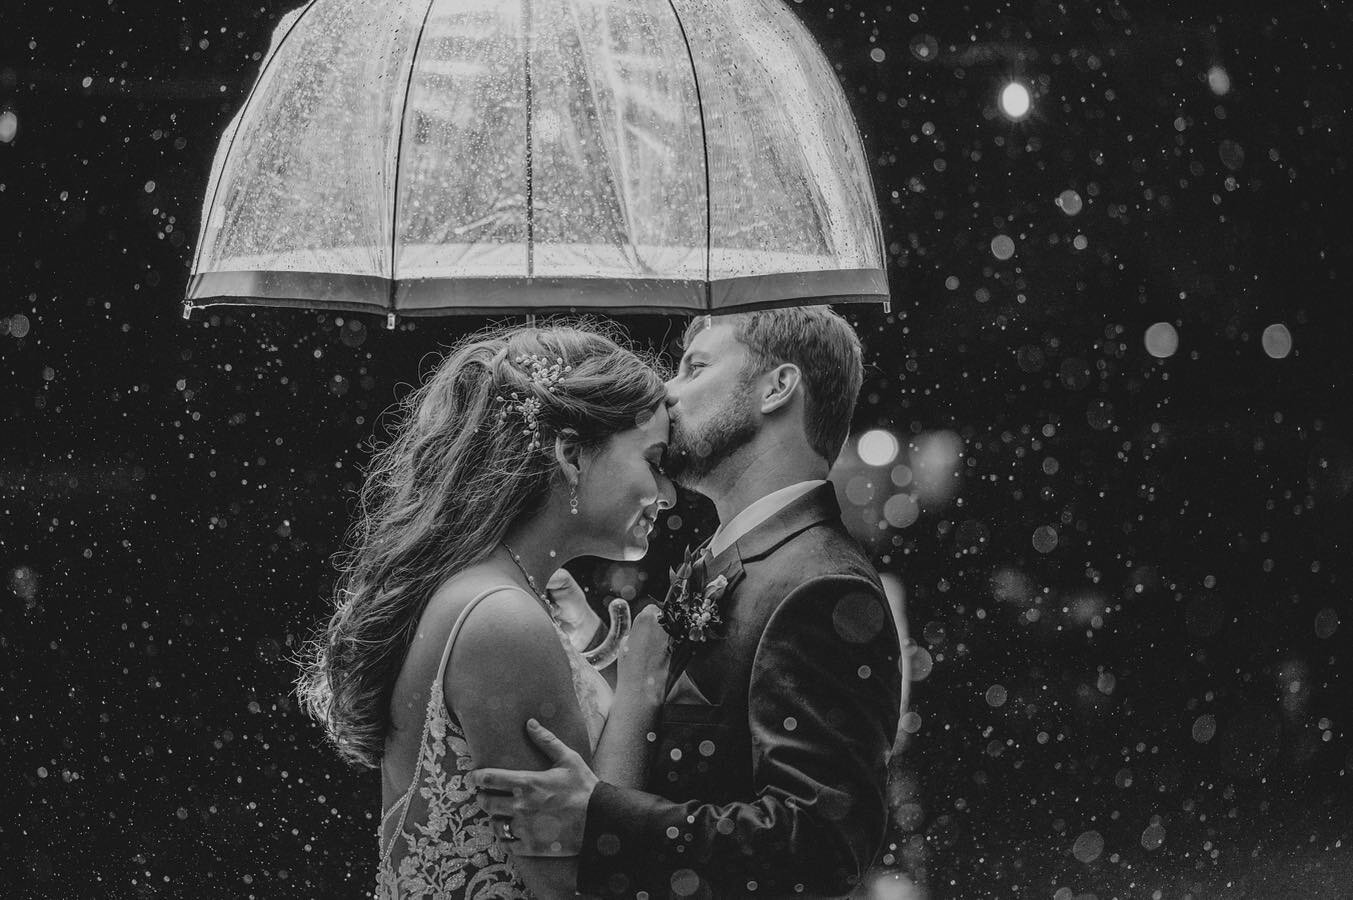 &ldquo;Can&rsquo;t help it if I wanna kiss you in the rain&rdquo;🤍

Wise words of Taylor Swift for my Taylor Swift loving girl! No amount of rain could stop the joy that surrounded this day! Somer + Logan&rsquo;s love for one another shined so brigh